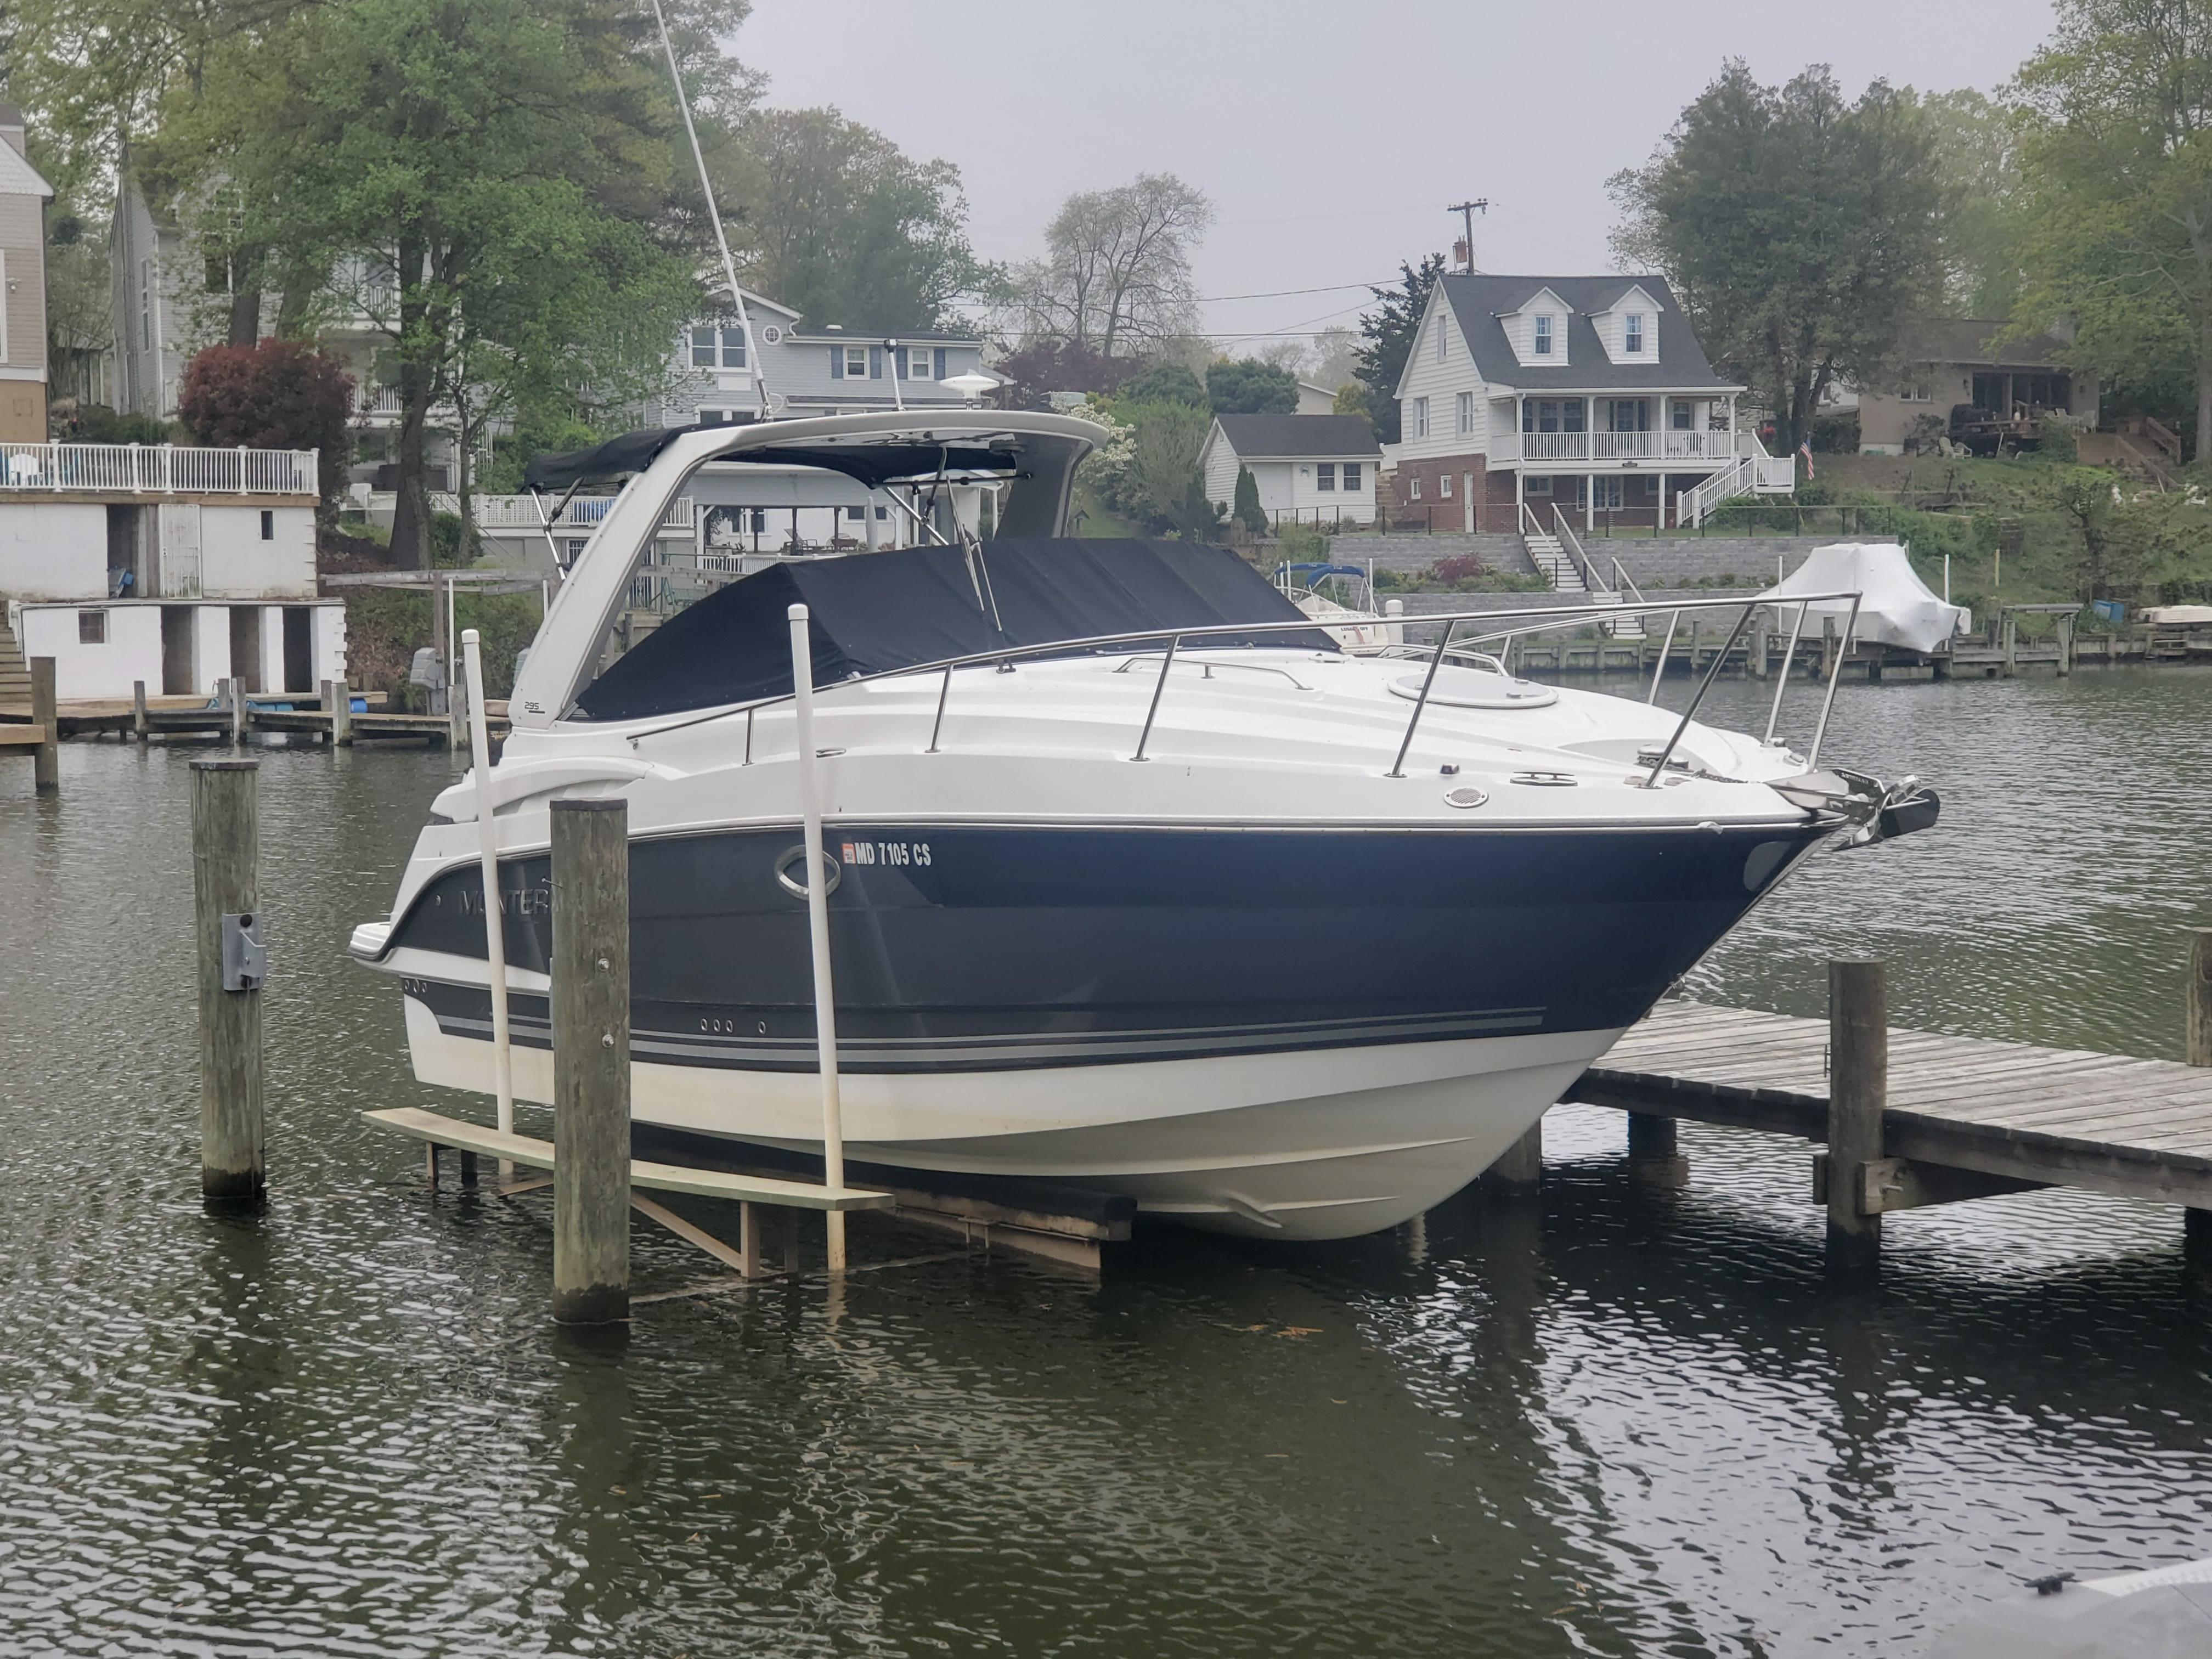 Tom Kat Yacht Brokers Of Annapolis